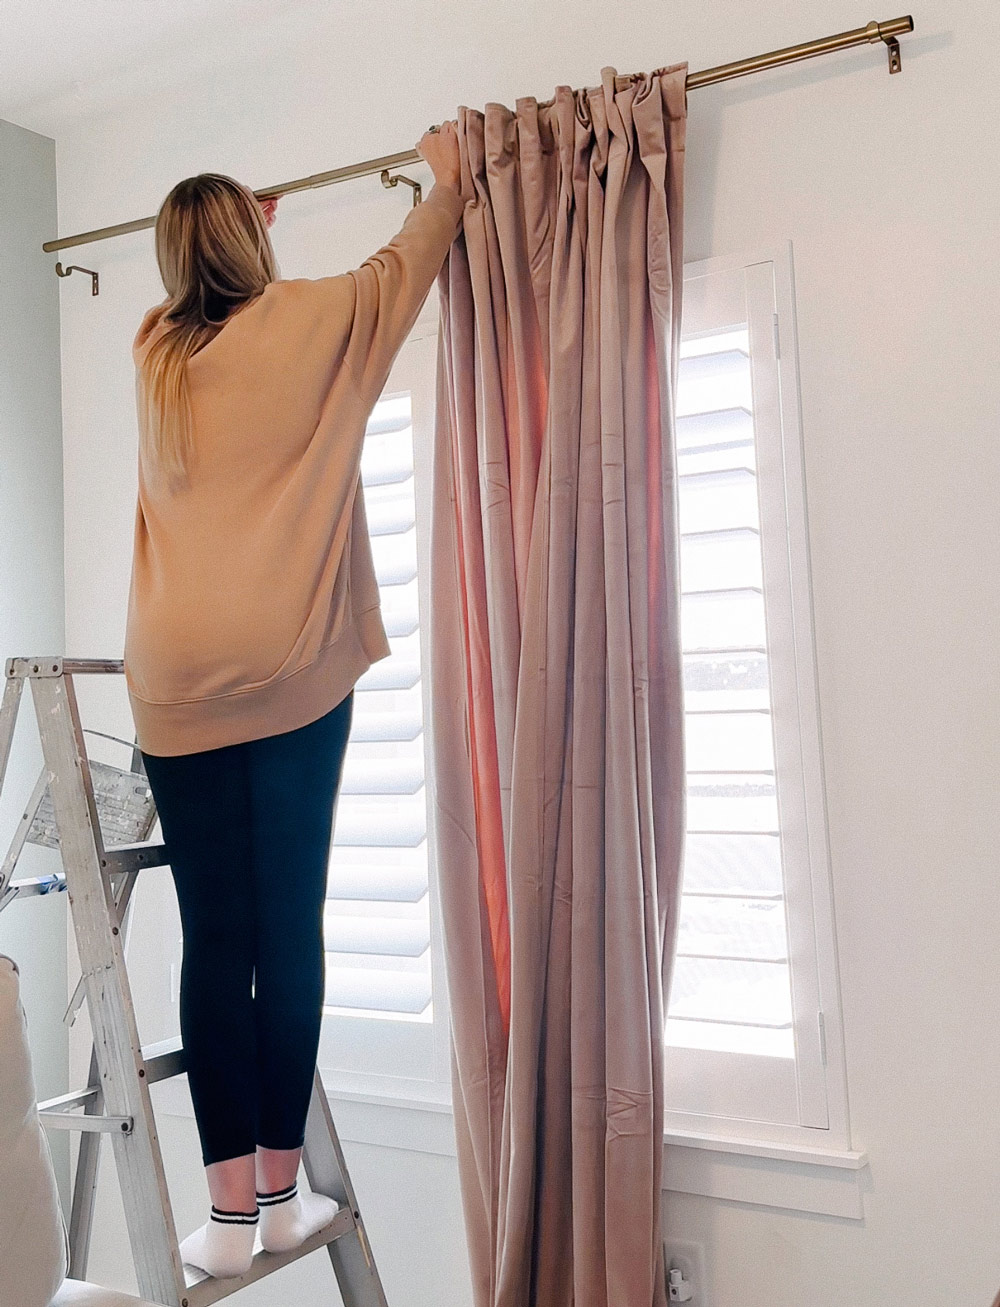 A person adding curtains.